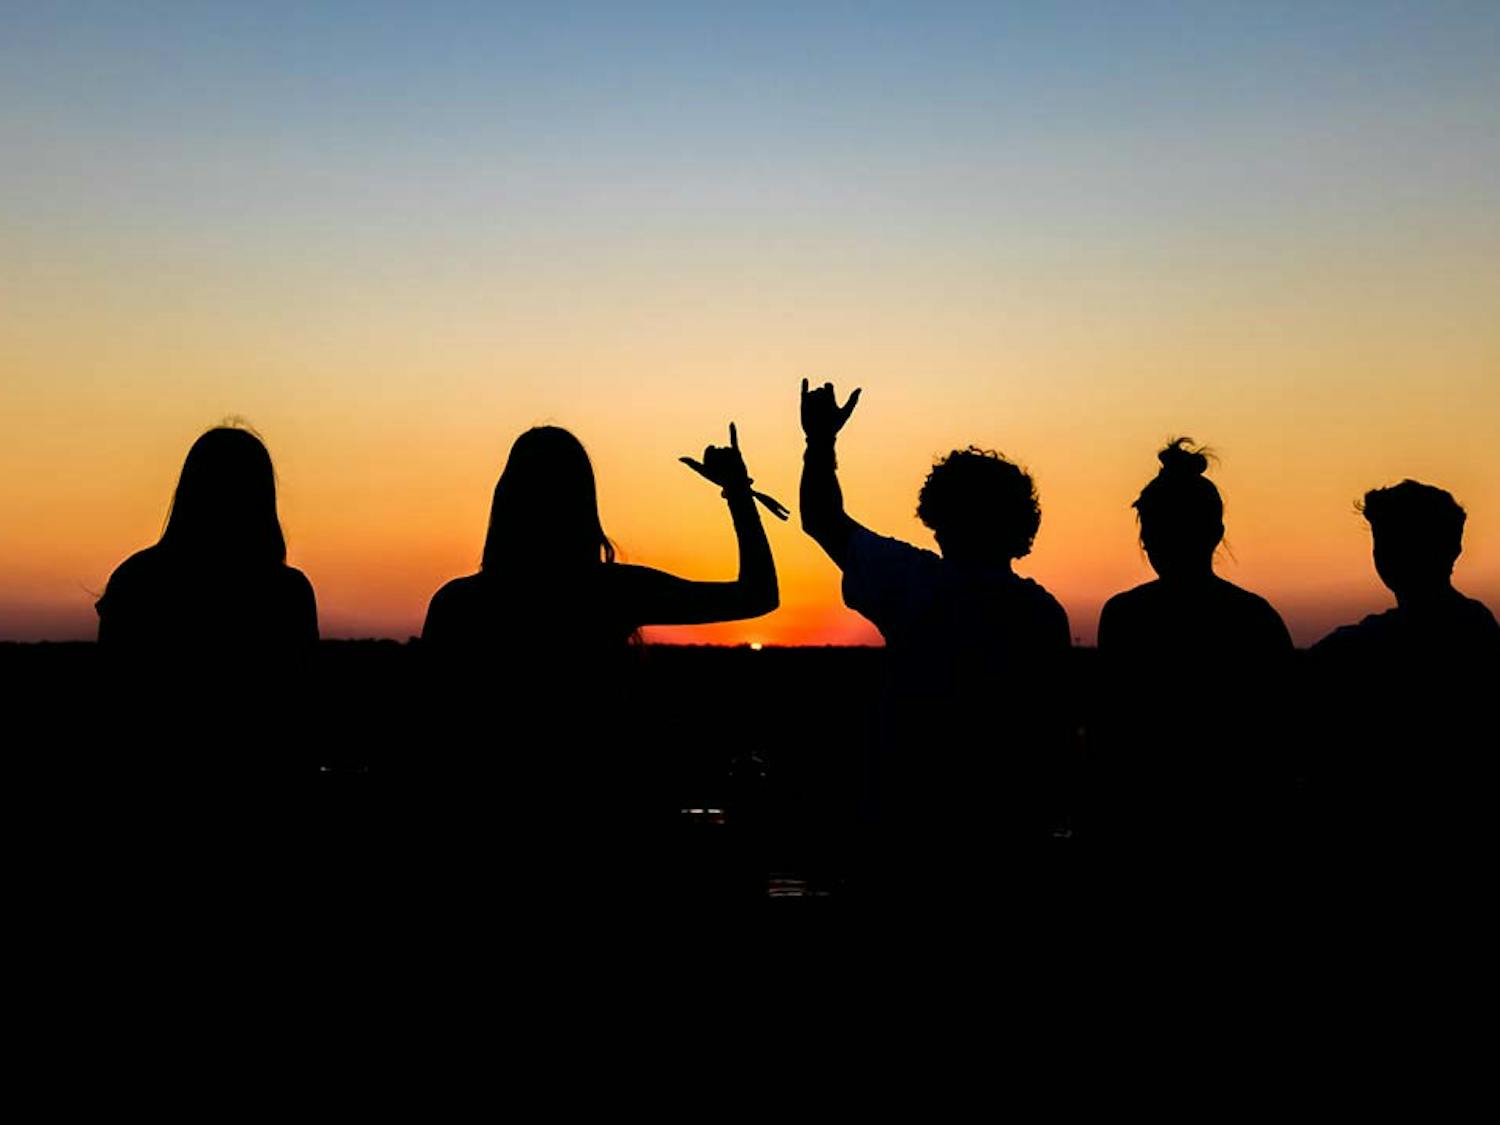 Students on the top of Horizon Garage watching the sunset on Sept. 21, 2022. The parking garage is located at 519 Main St, Columbia, SC, and offers great views of the city skyline.